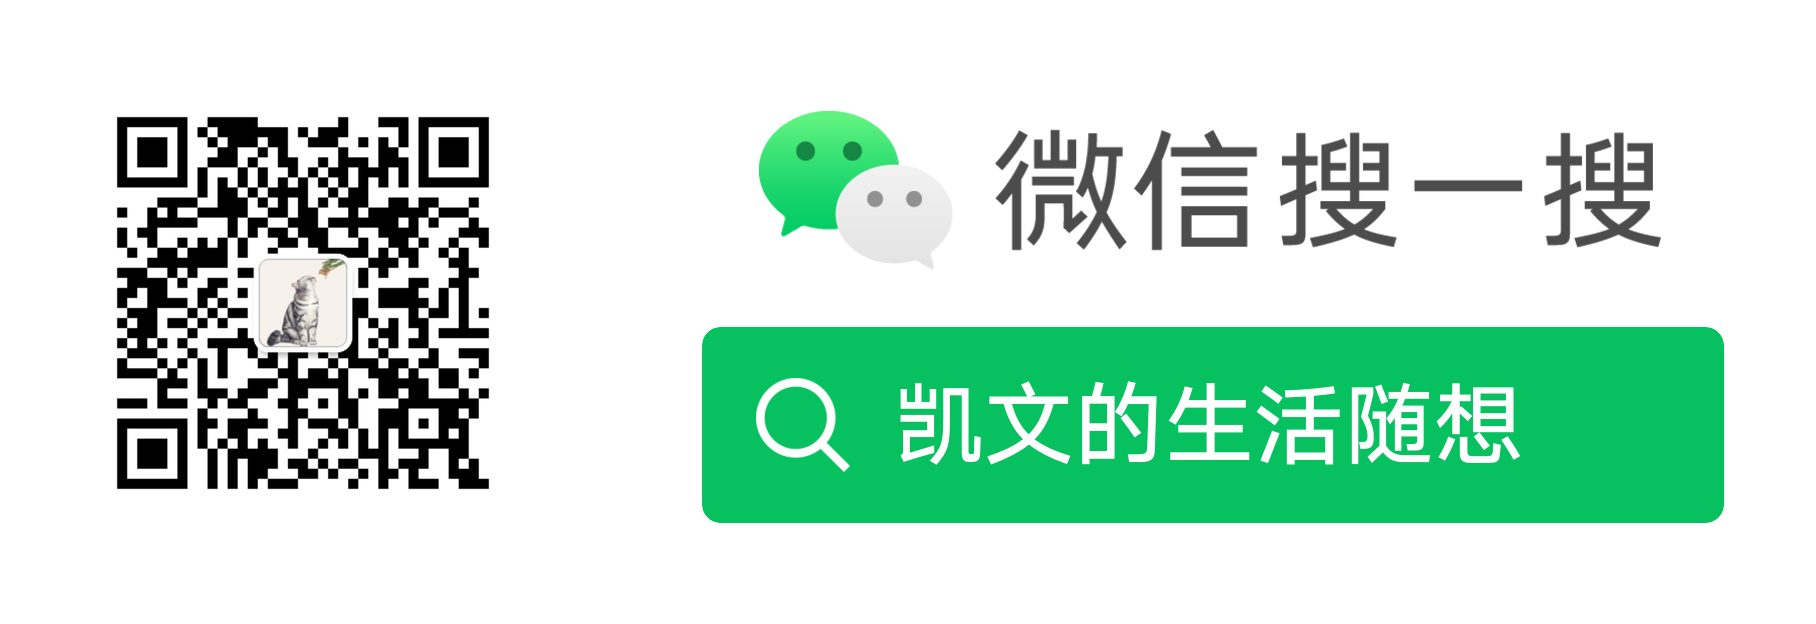 qccode_for_wechat